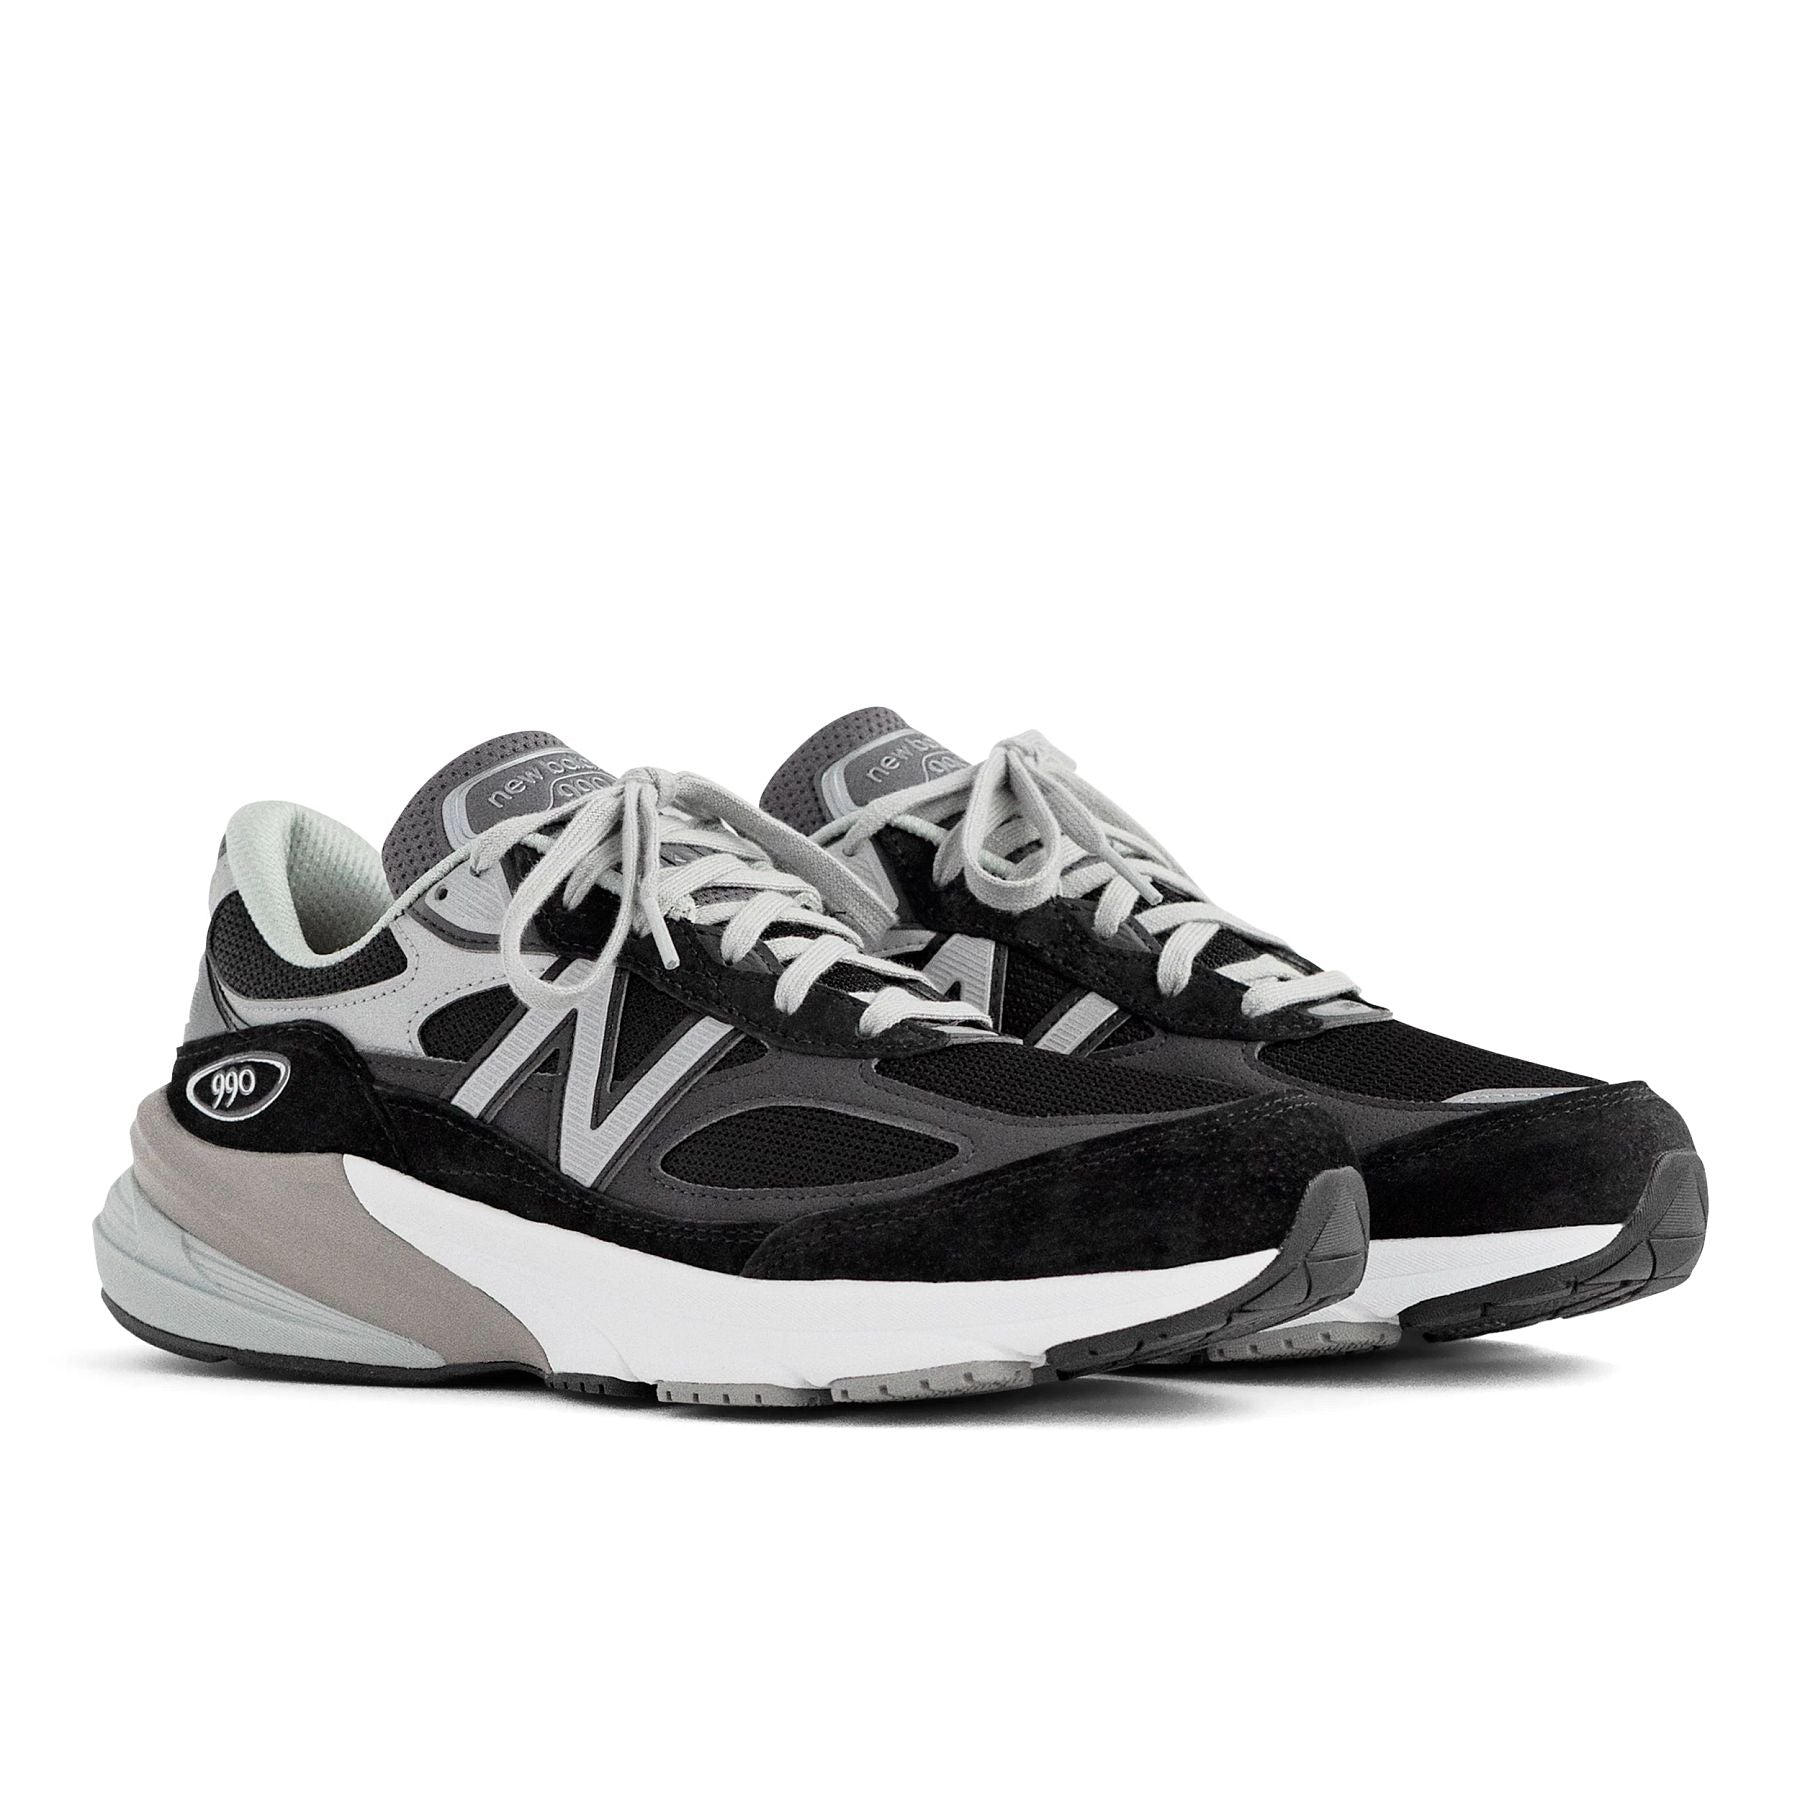 Front angle view of the Women's New Balance 990 V6 Lifestyle shoe in Black/White